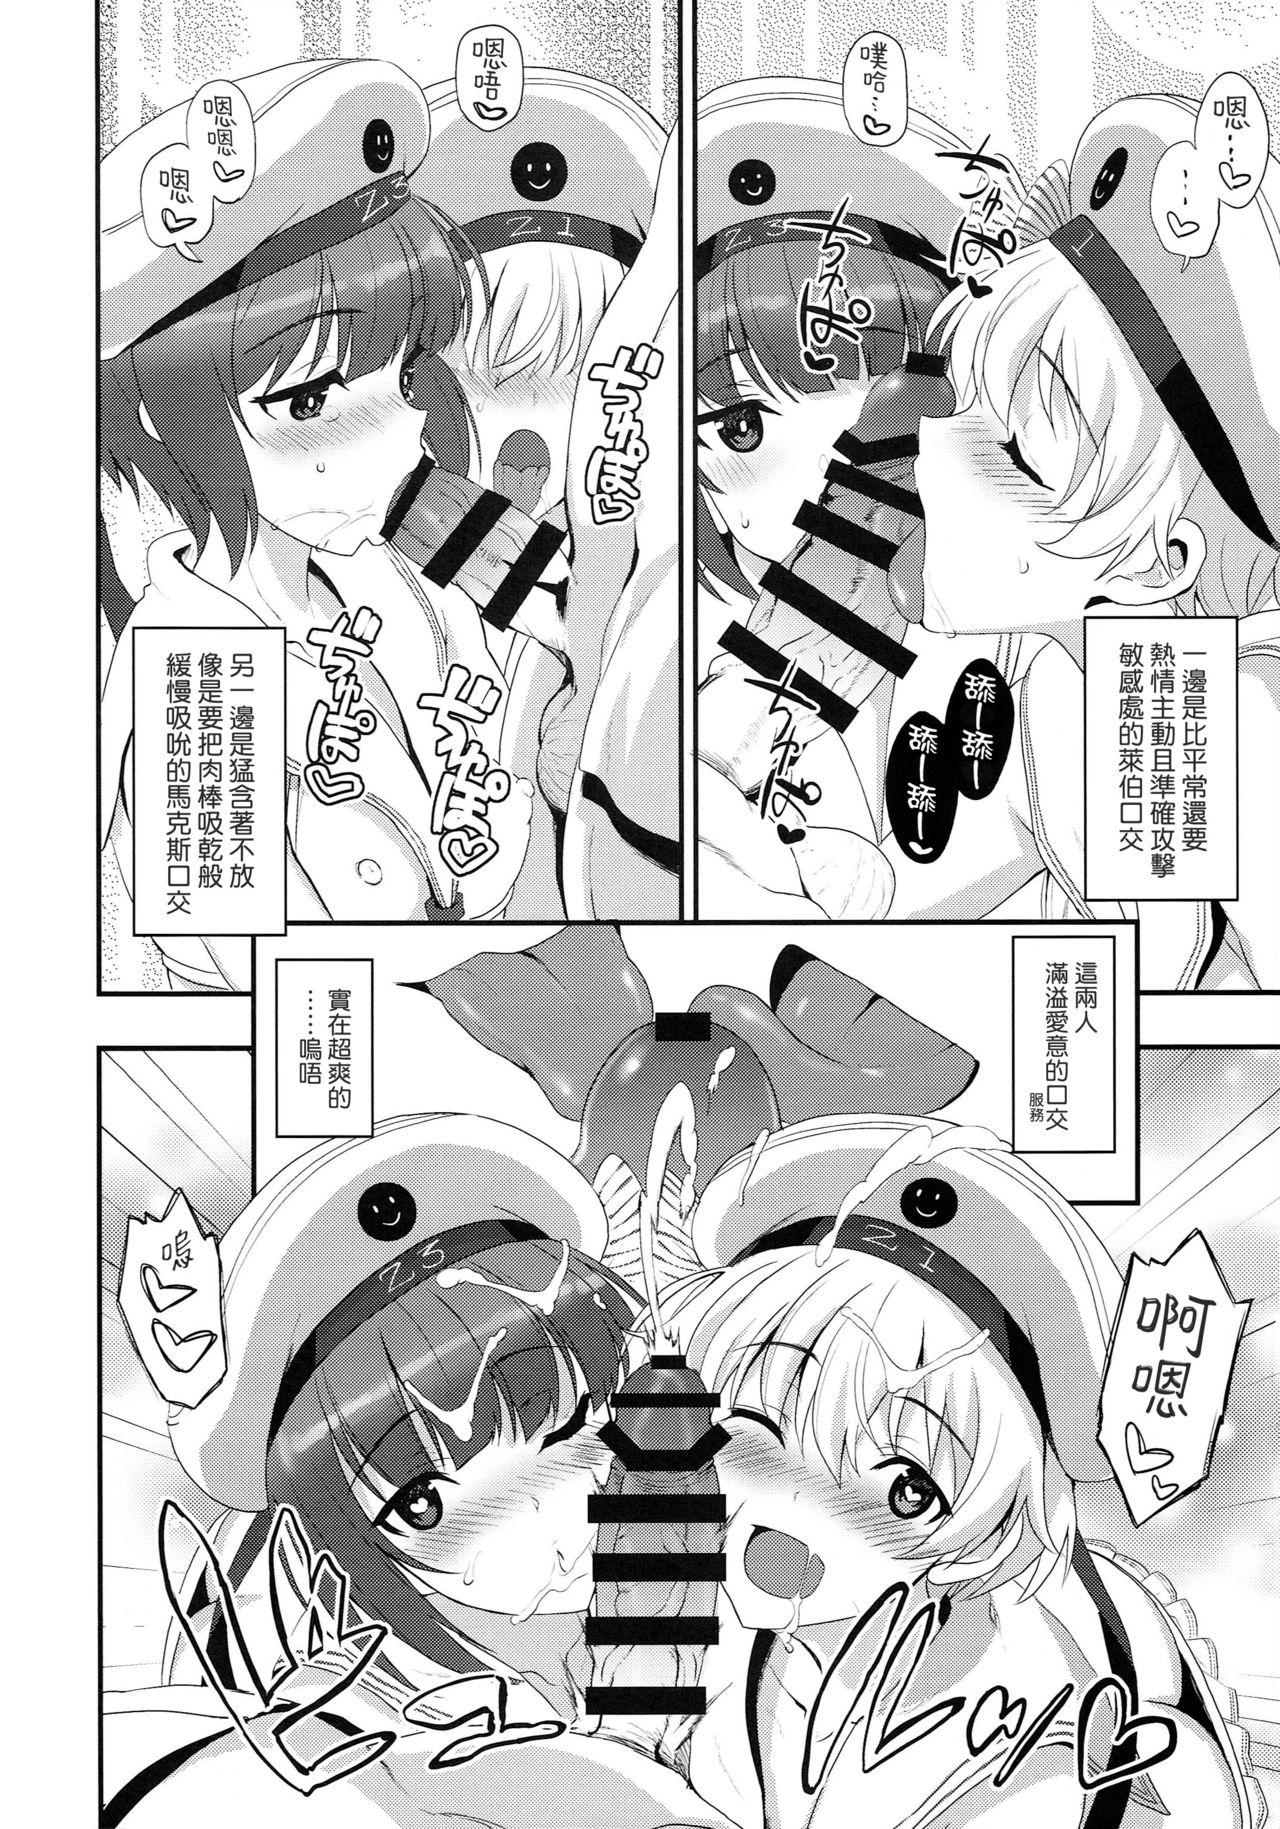 Rubbing Apfelschorle - Kantai collection France - Page 8